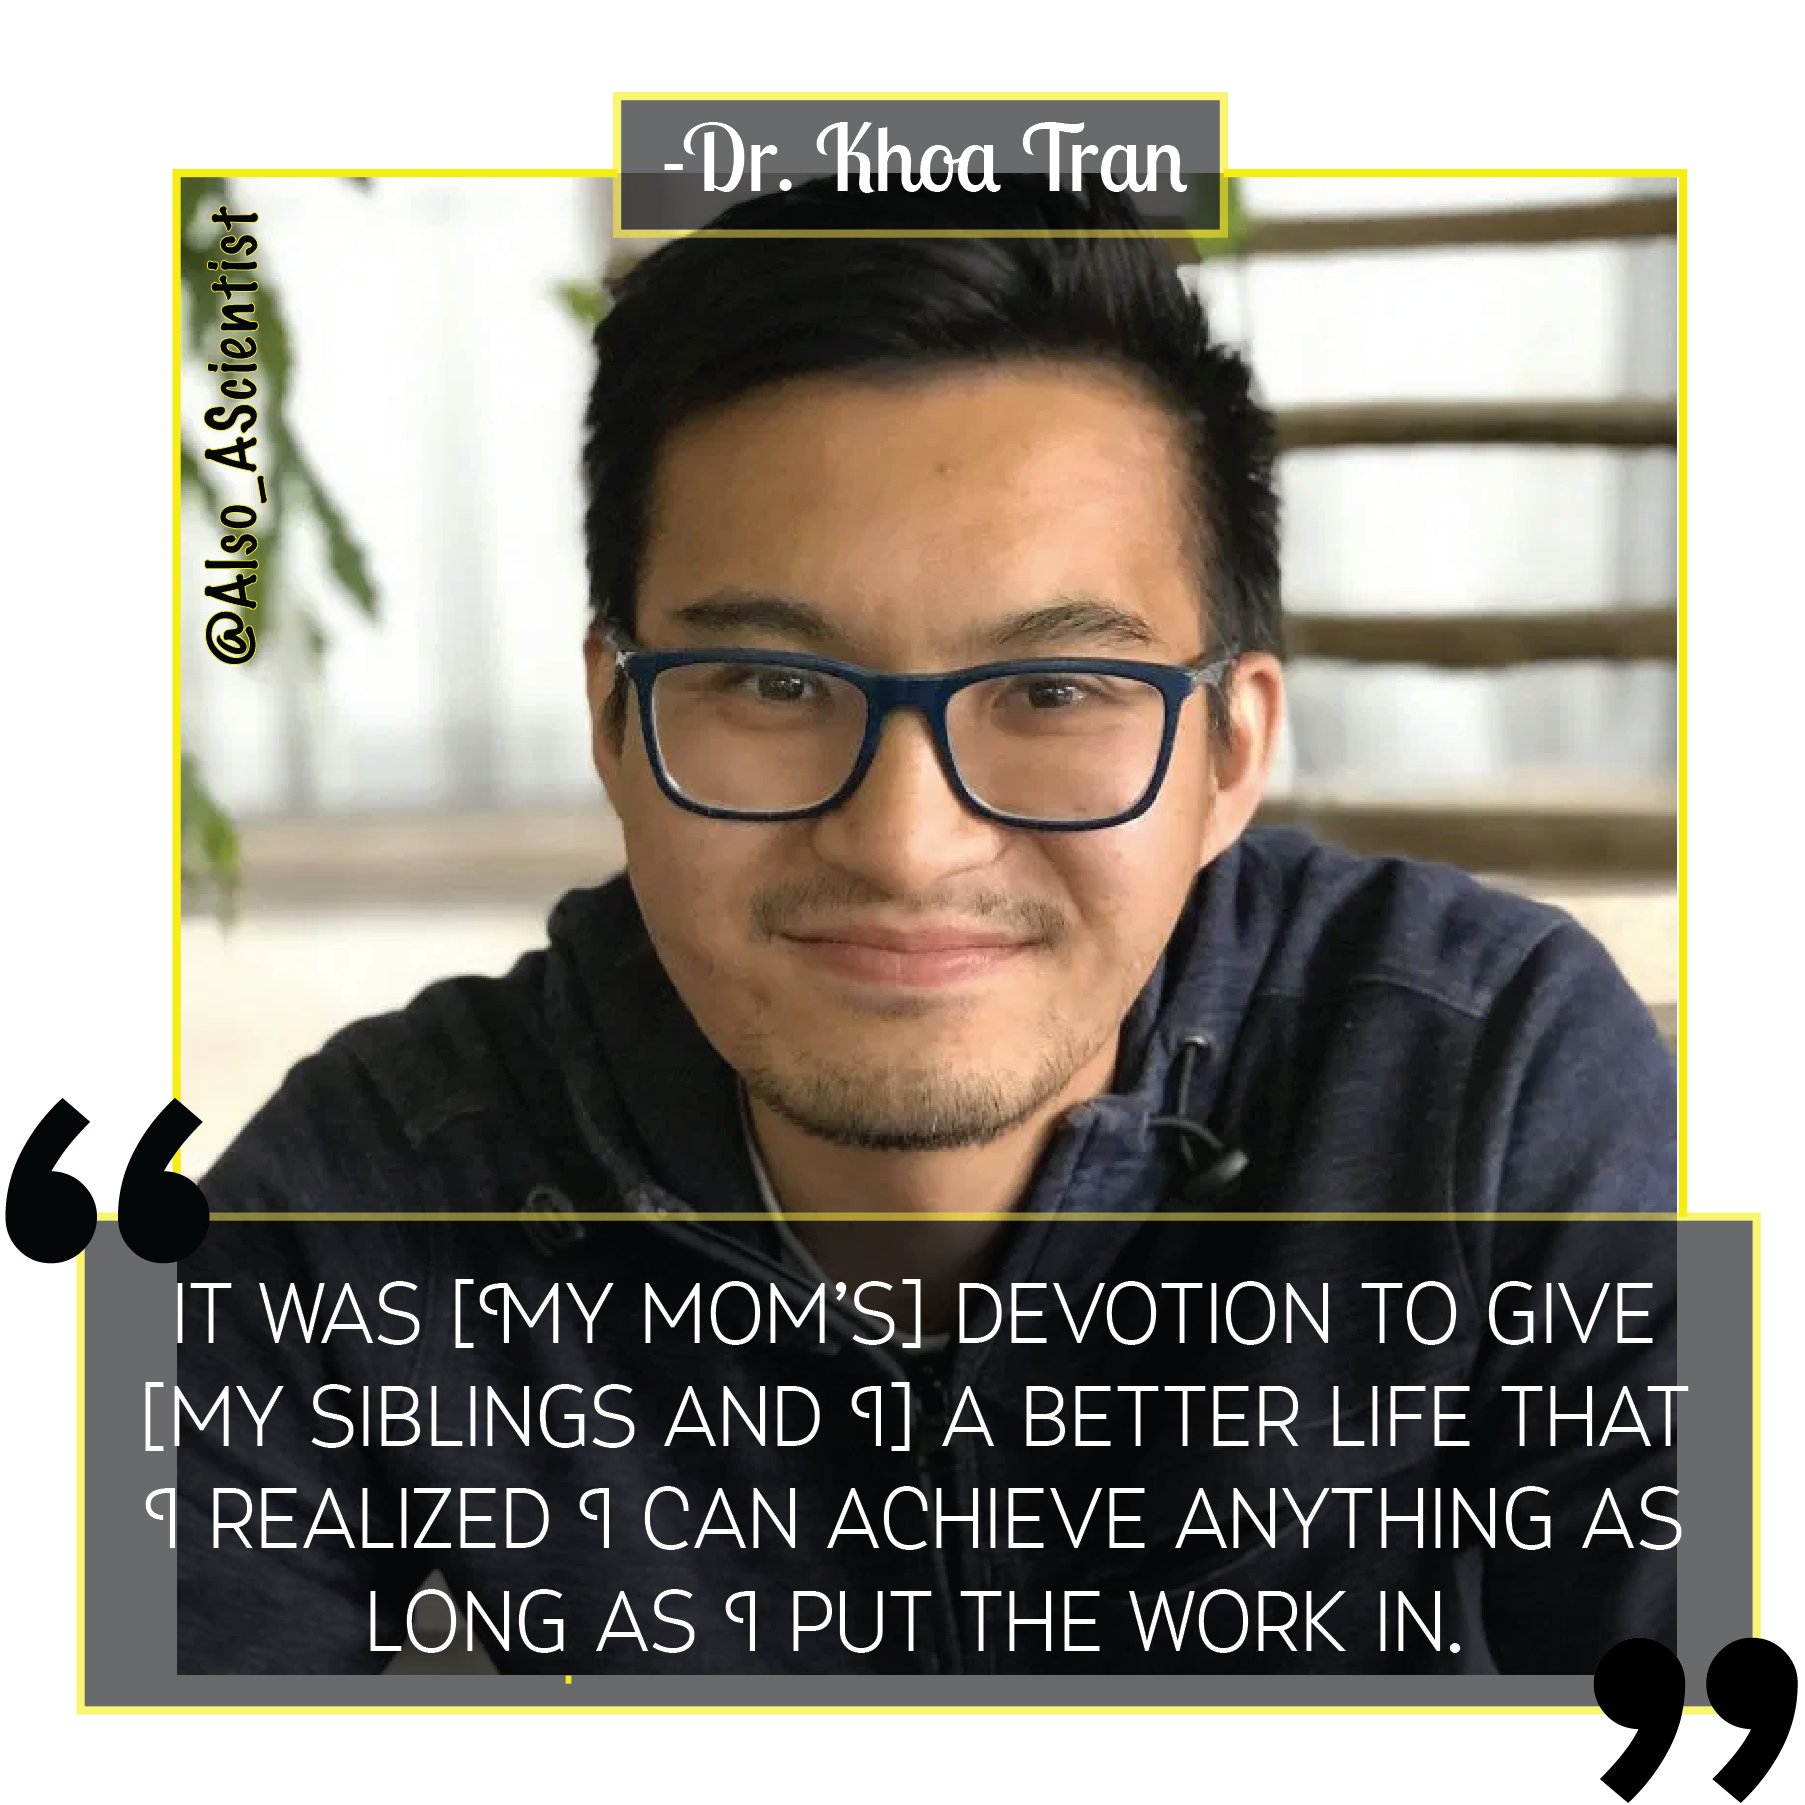 Our very own, Khoa Tran, is featured as today’s Unique Scientist!  Check out his great story below!